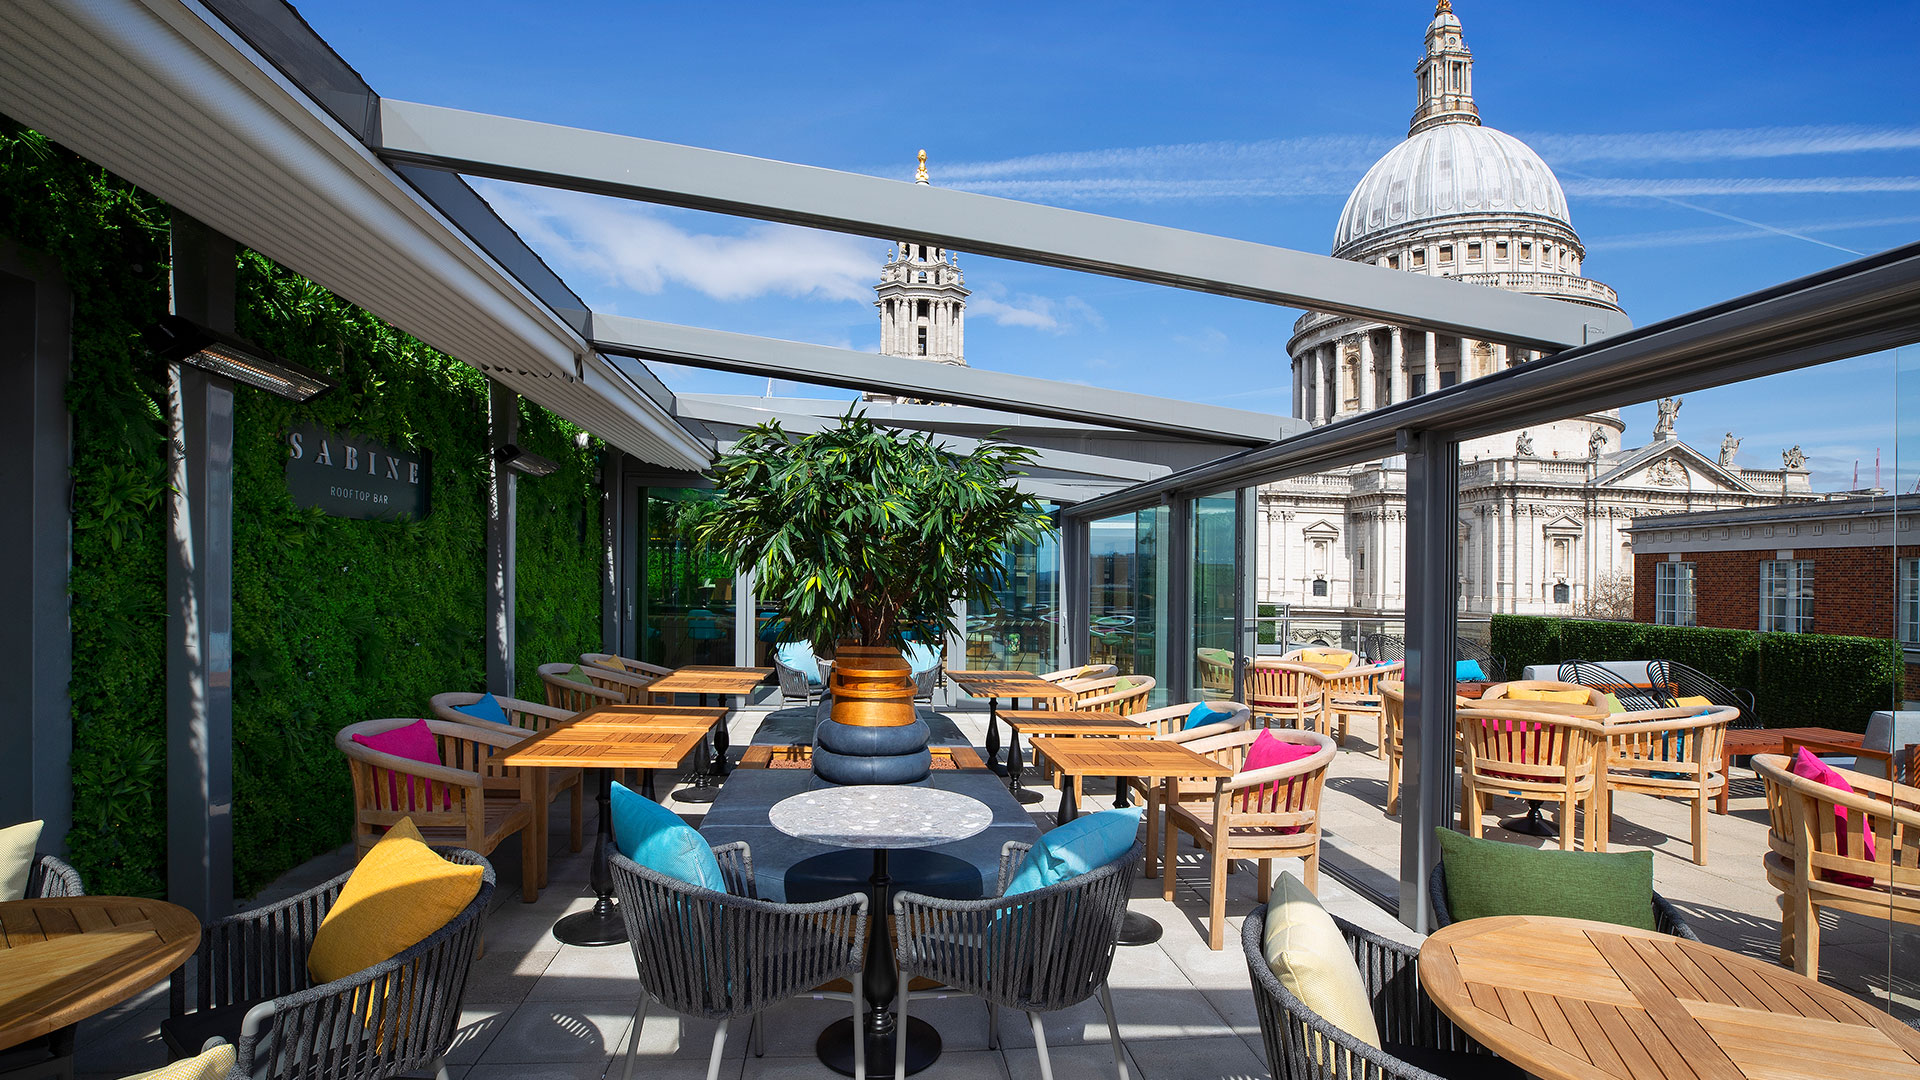 Bar roof terrace overlooking St Paul's Cathedral in London